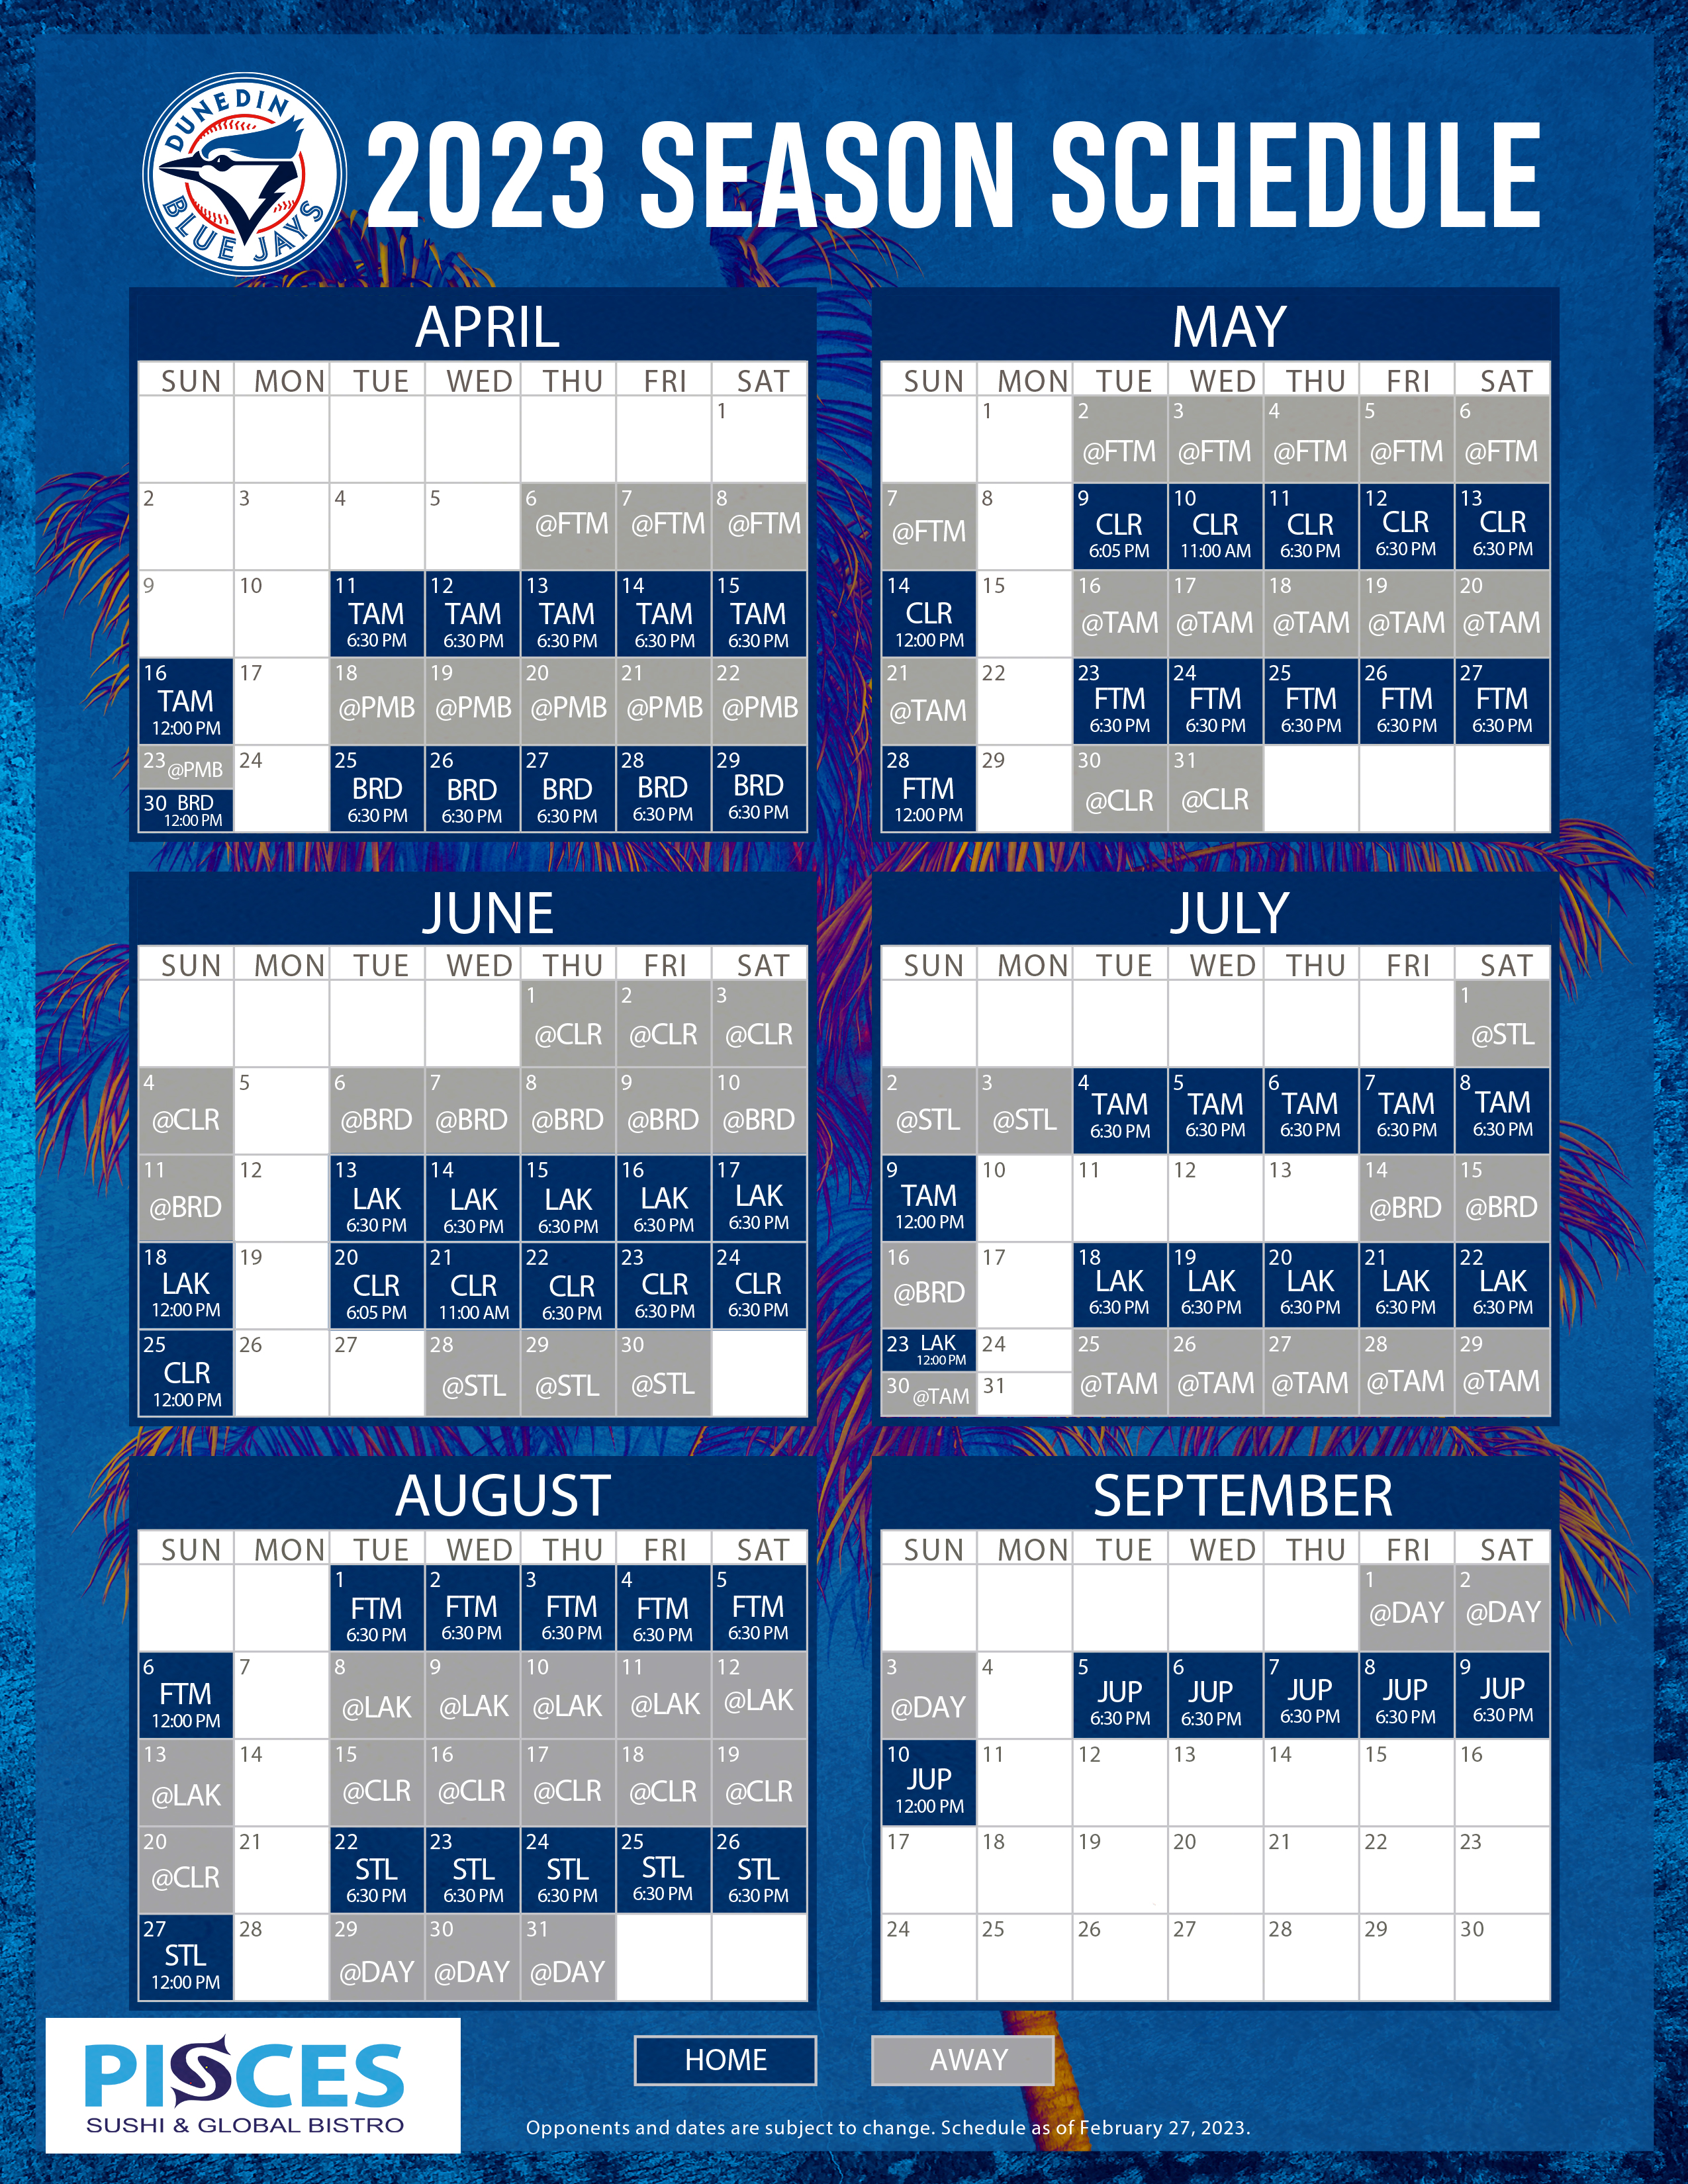 Toronto Blue Jays Promotions and Giveaway Schedule